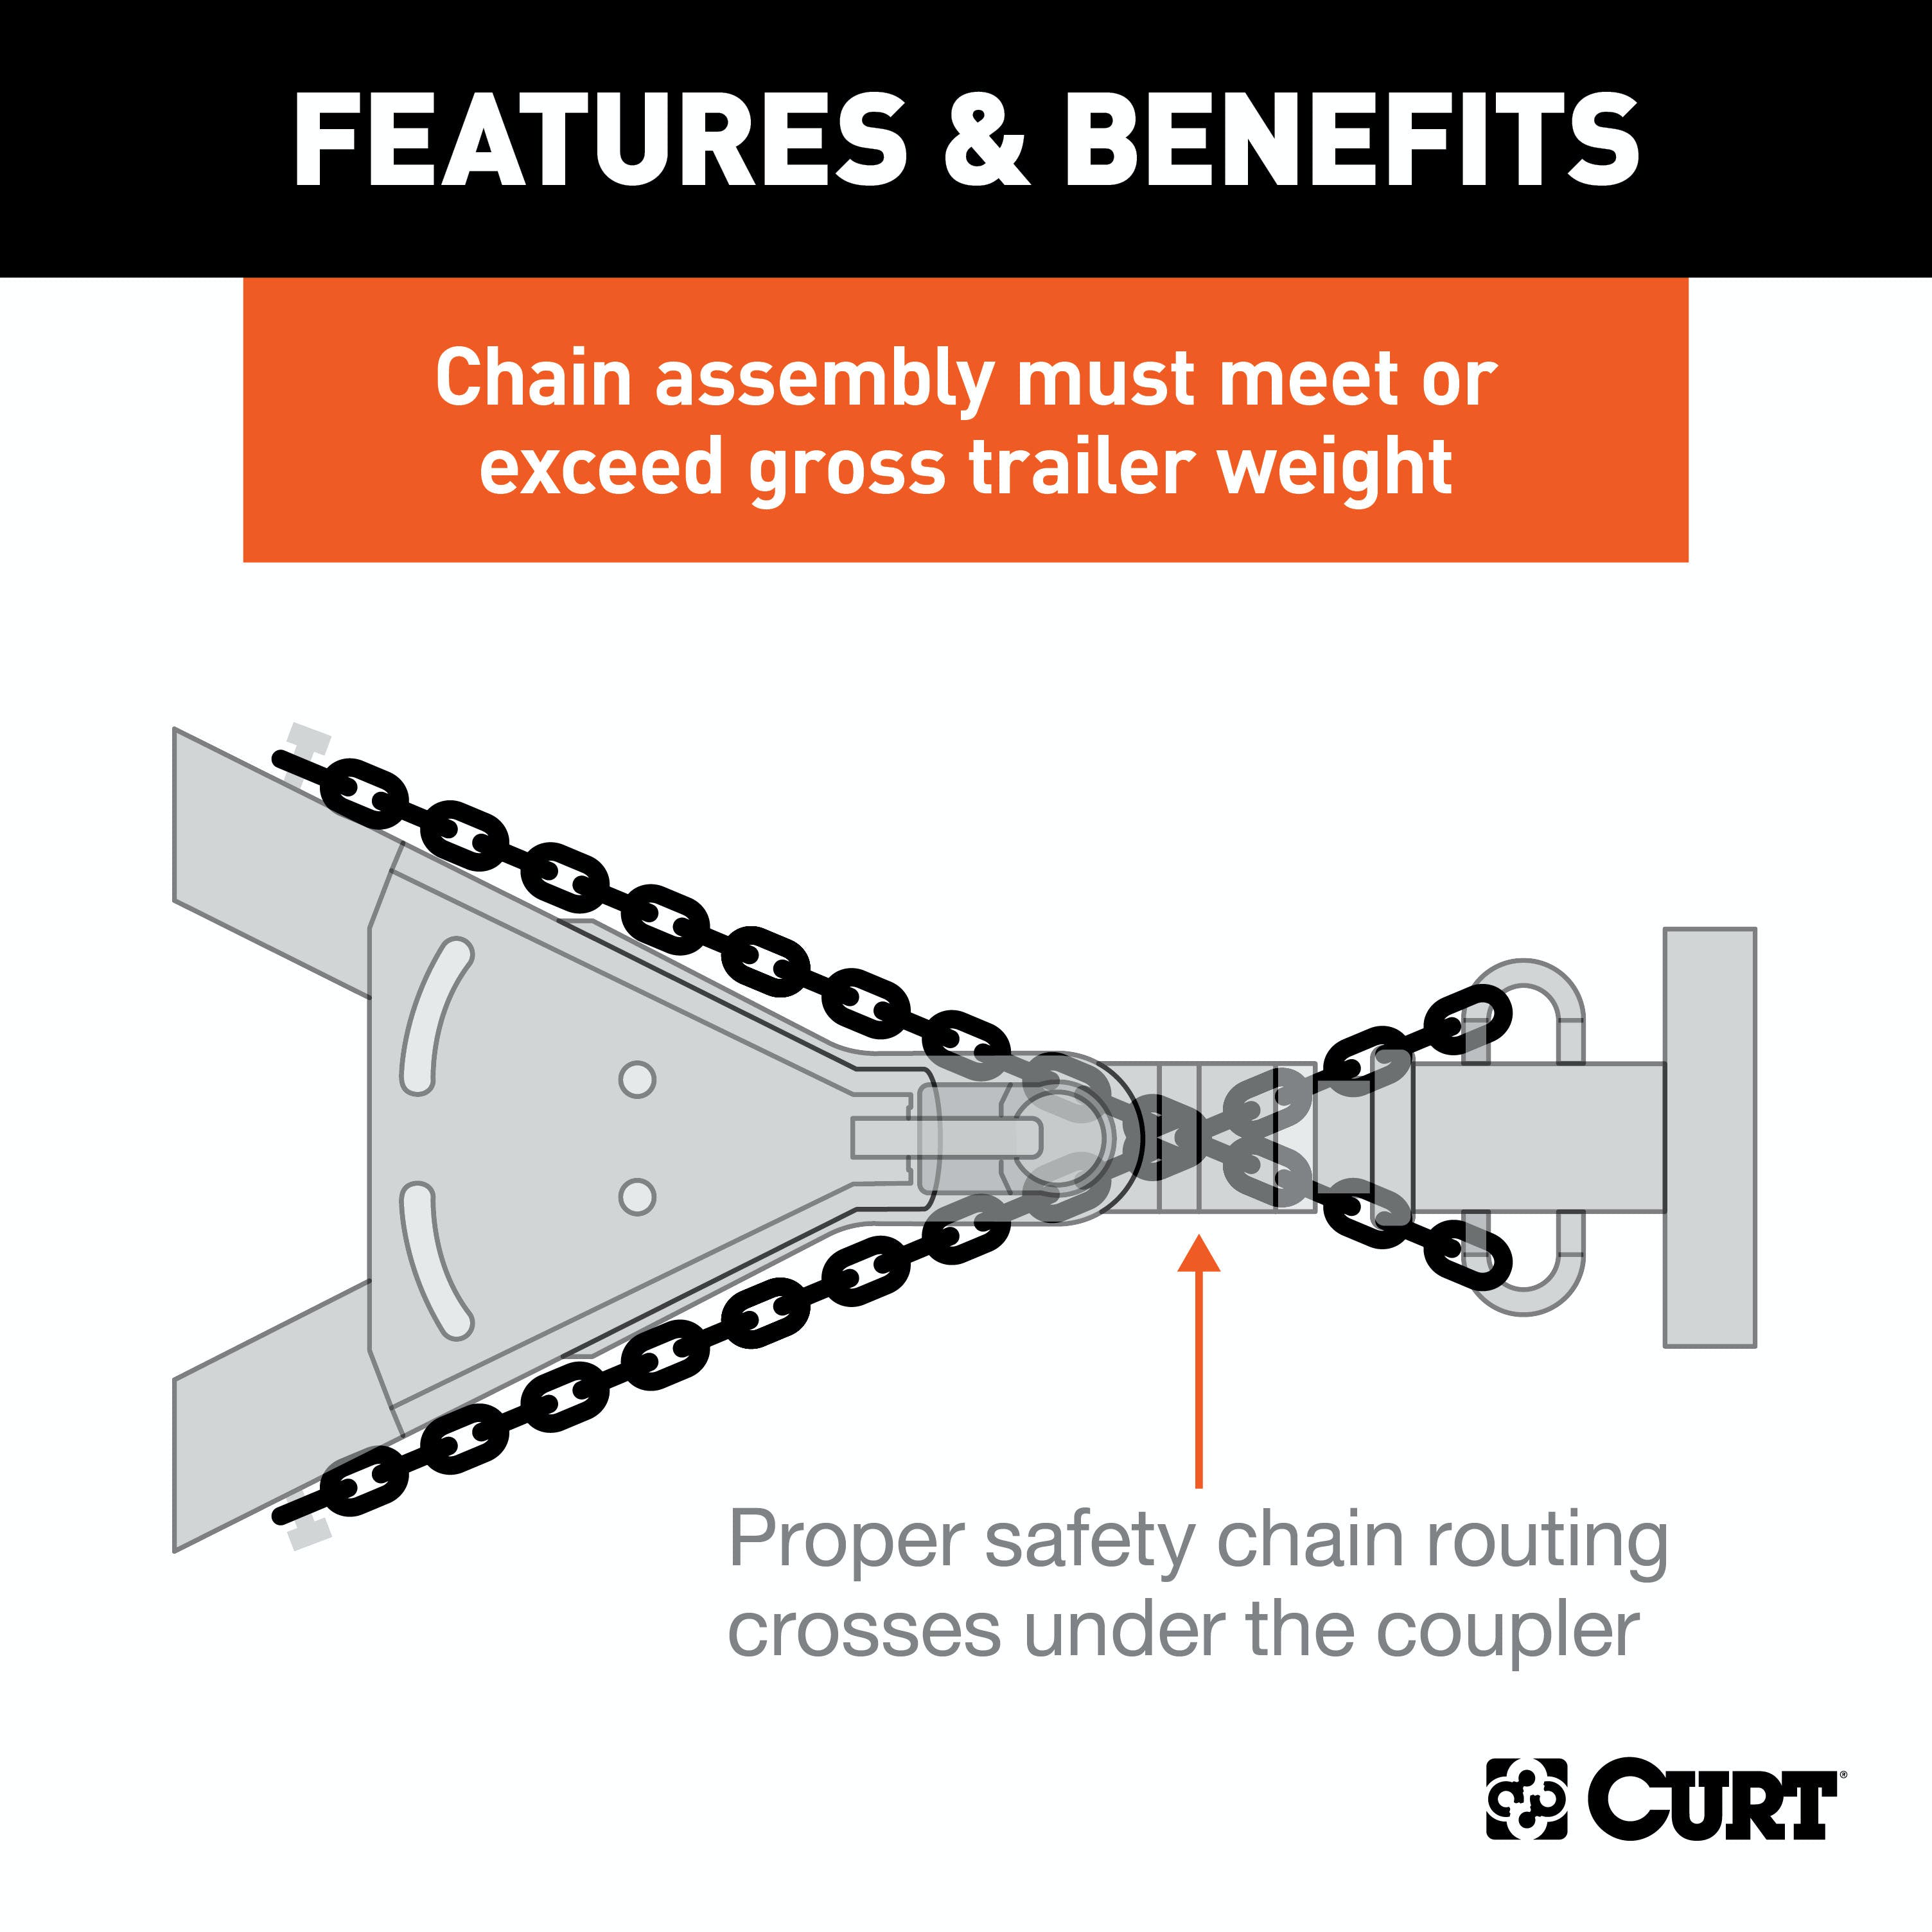 CURT 80302 35 Safety Chain with 1 Clevis Hook (7,800 lbs, Clear Zinc)